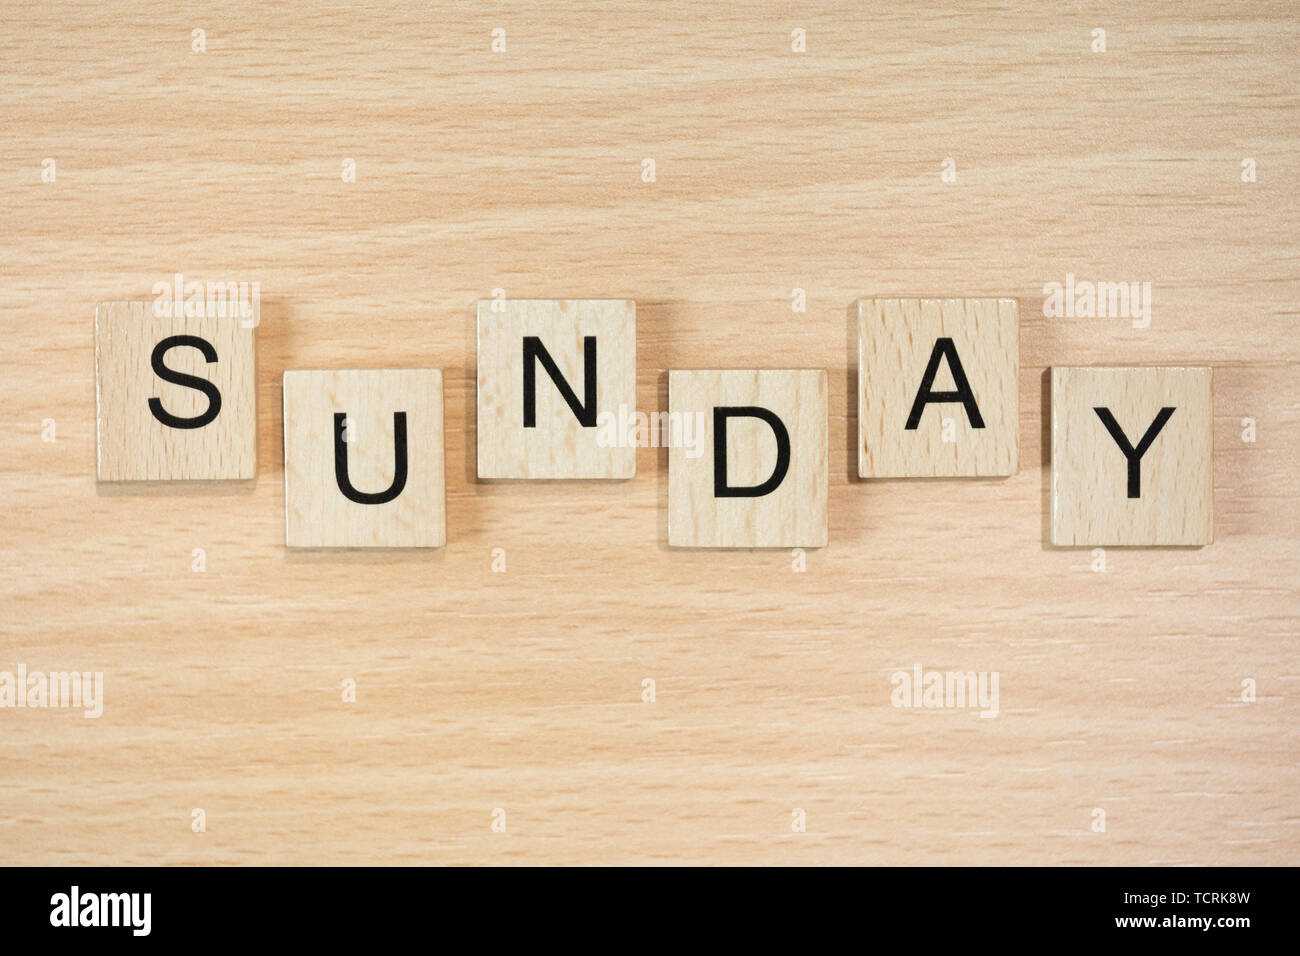 The word Sunday, spelt out using wooden tiles on a wood effect background. Stock Photo